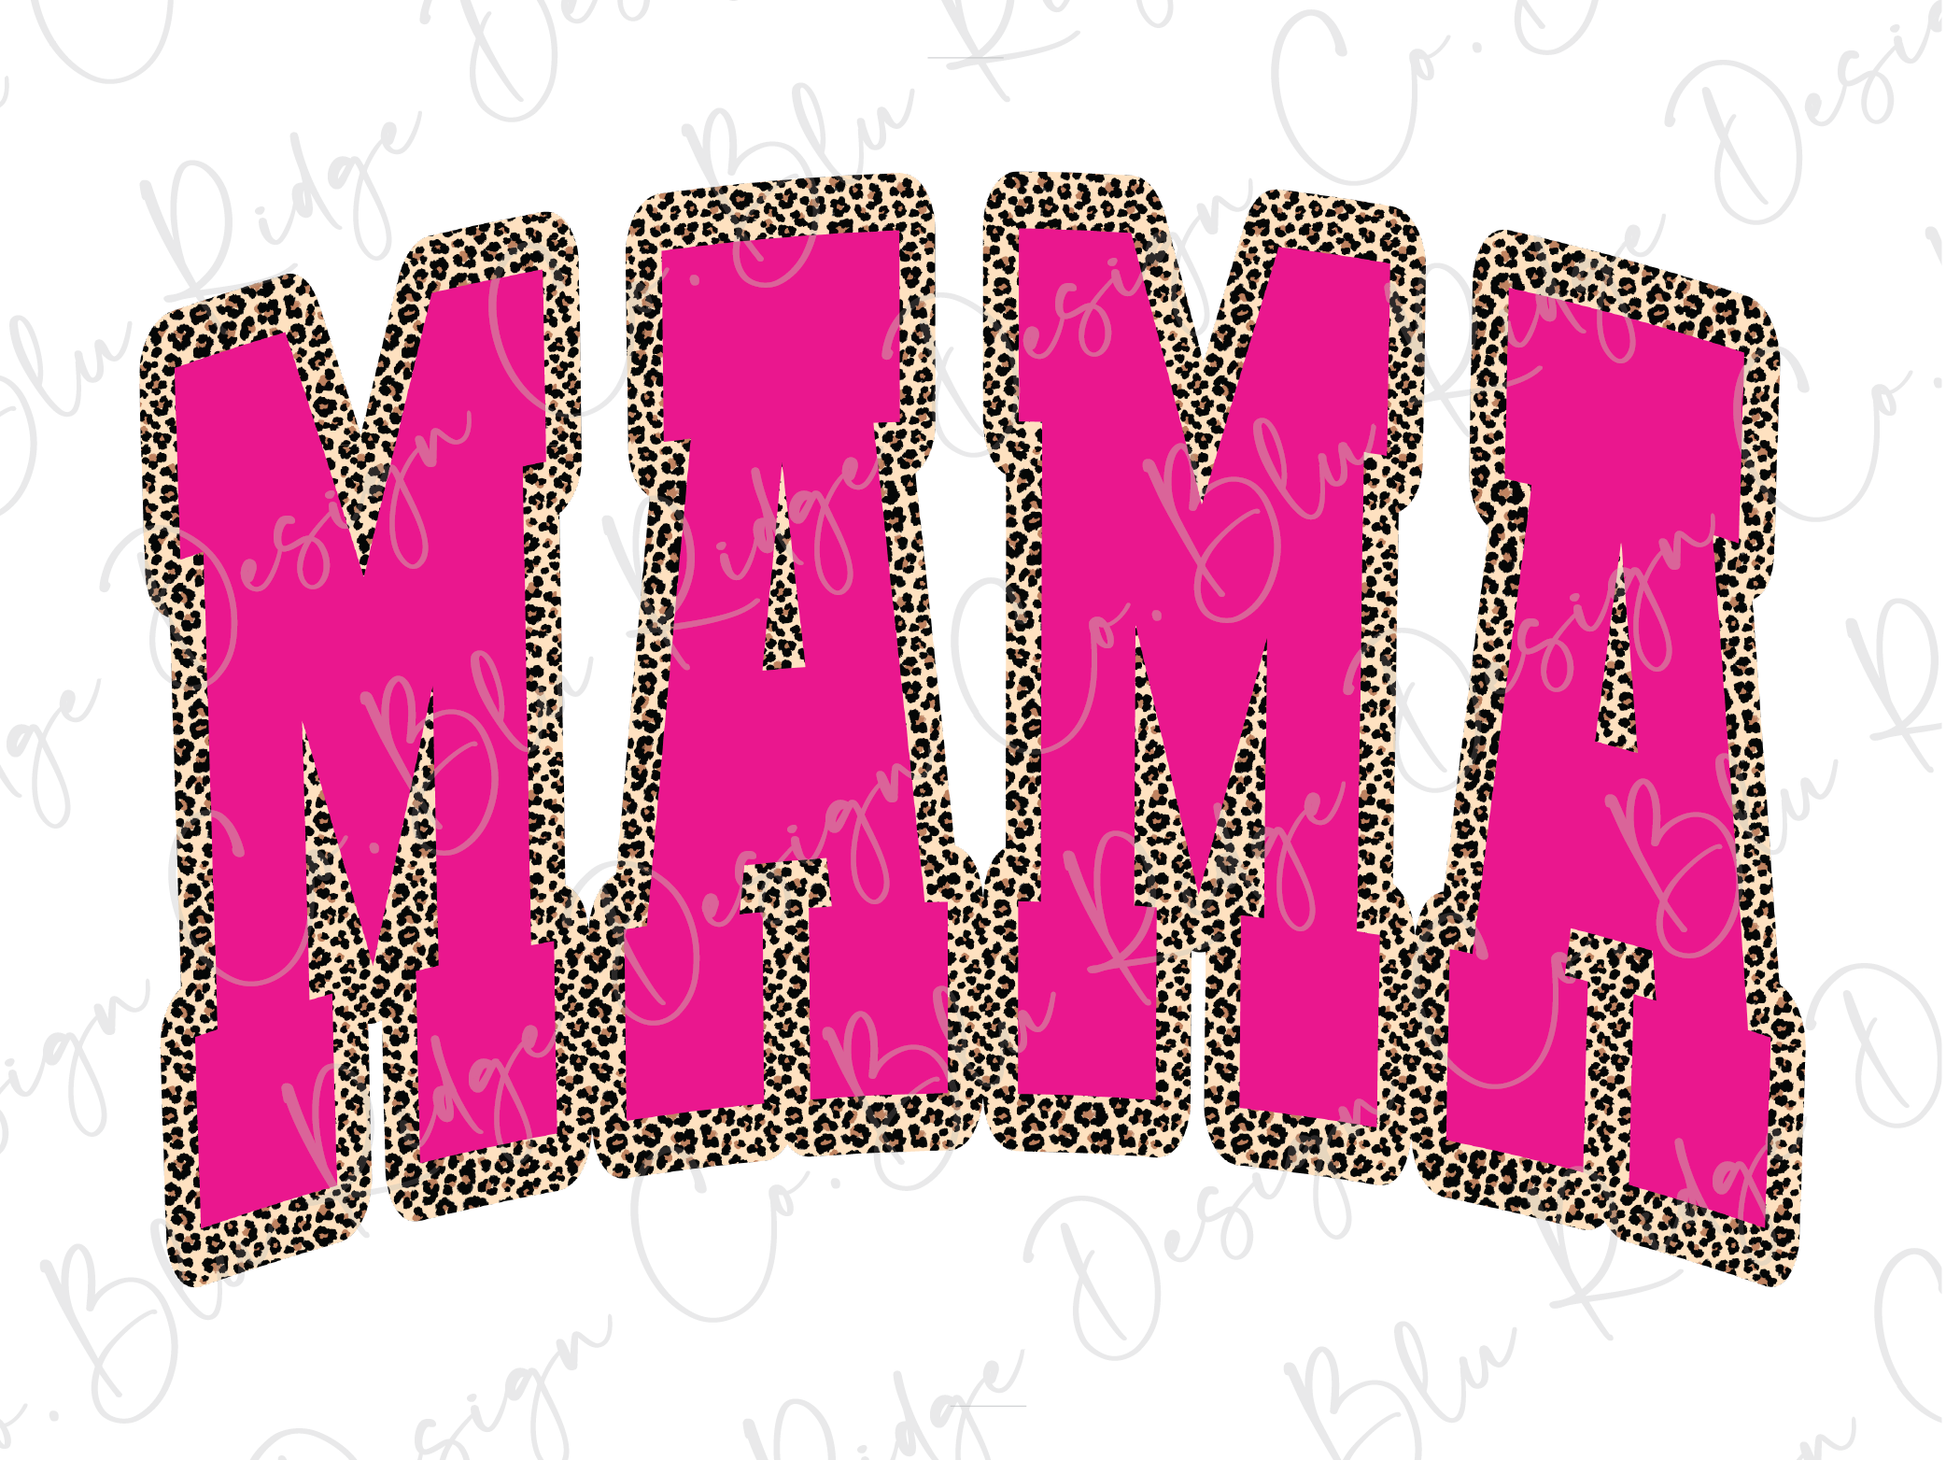 the word mama is made up of leopard print